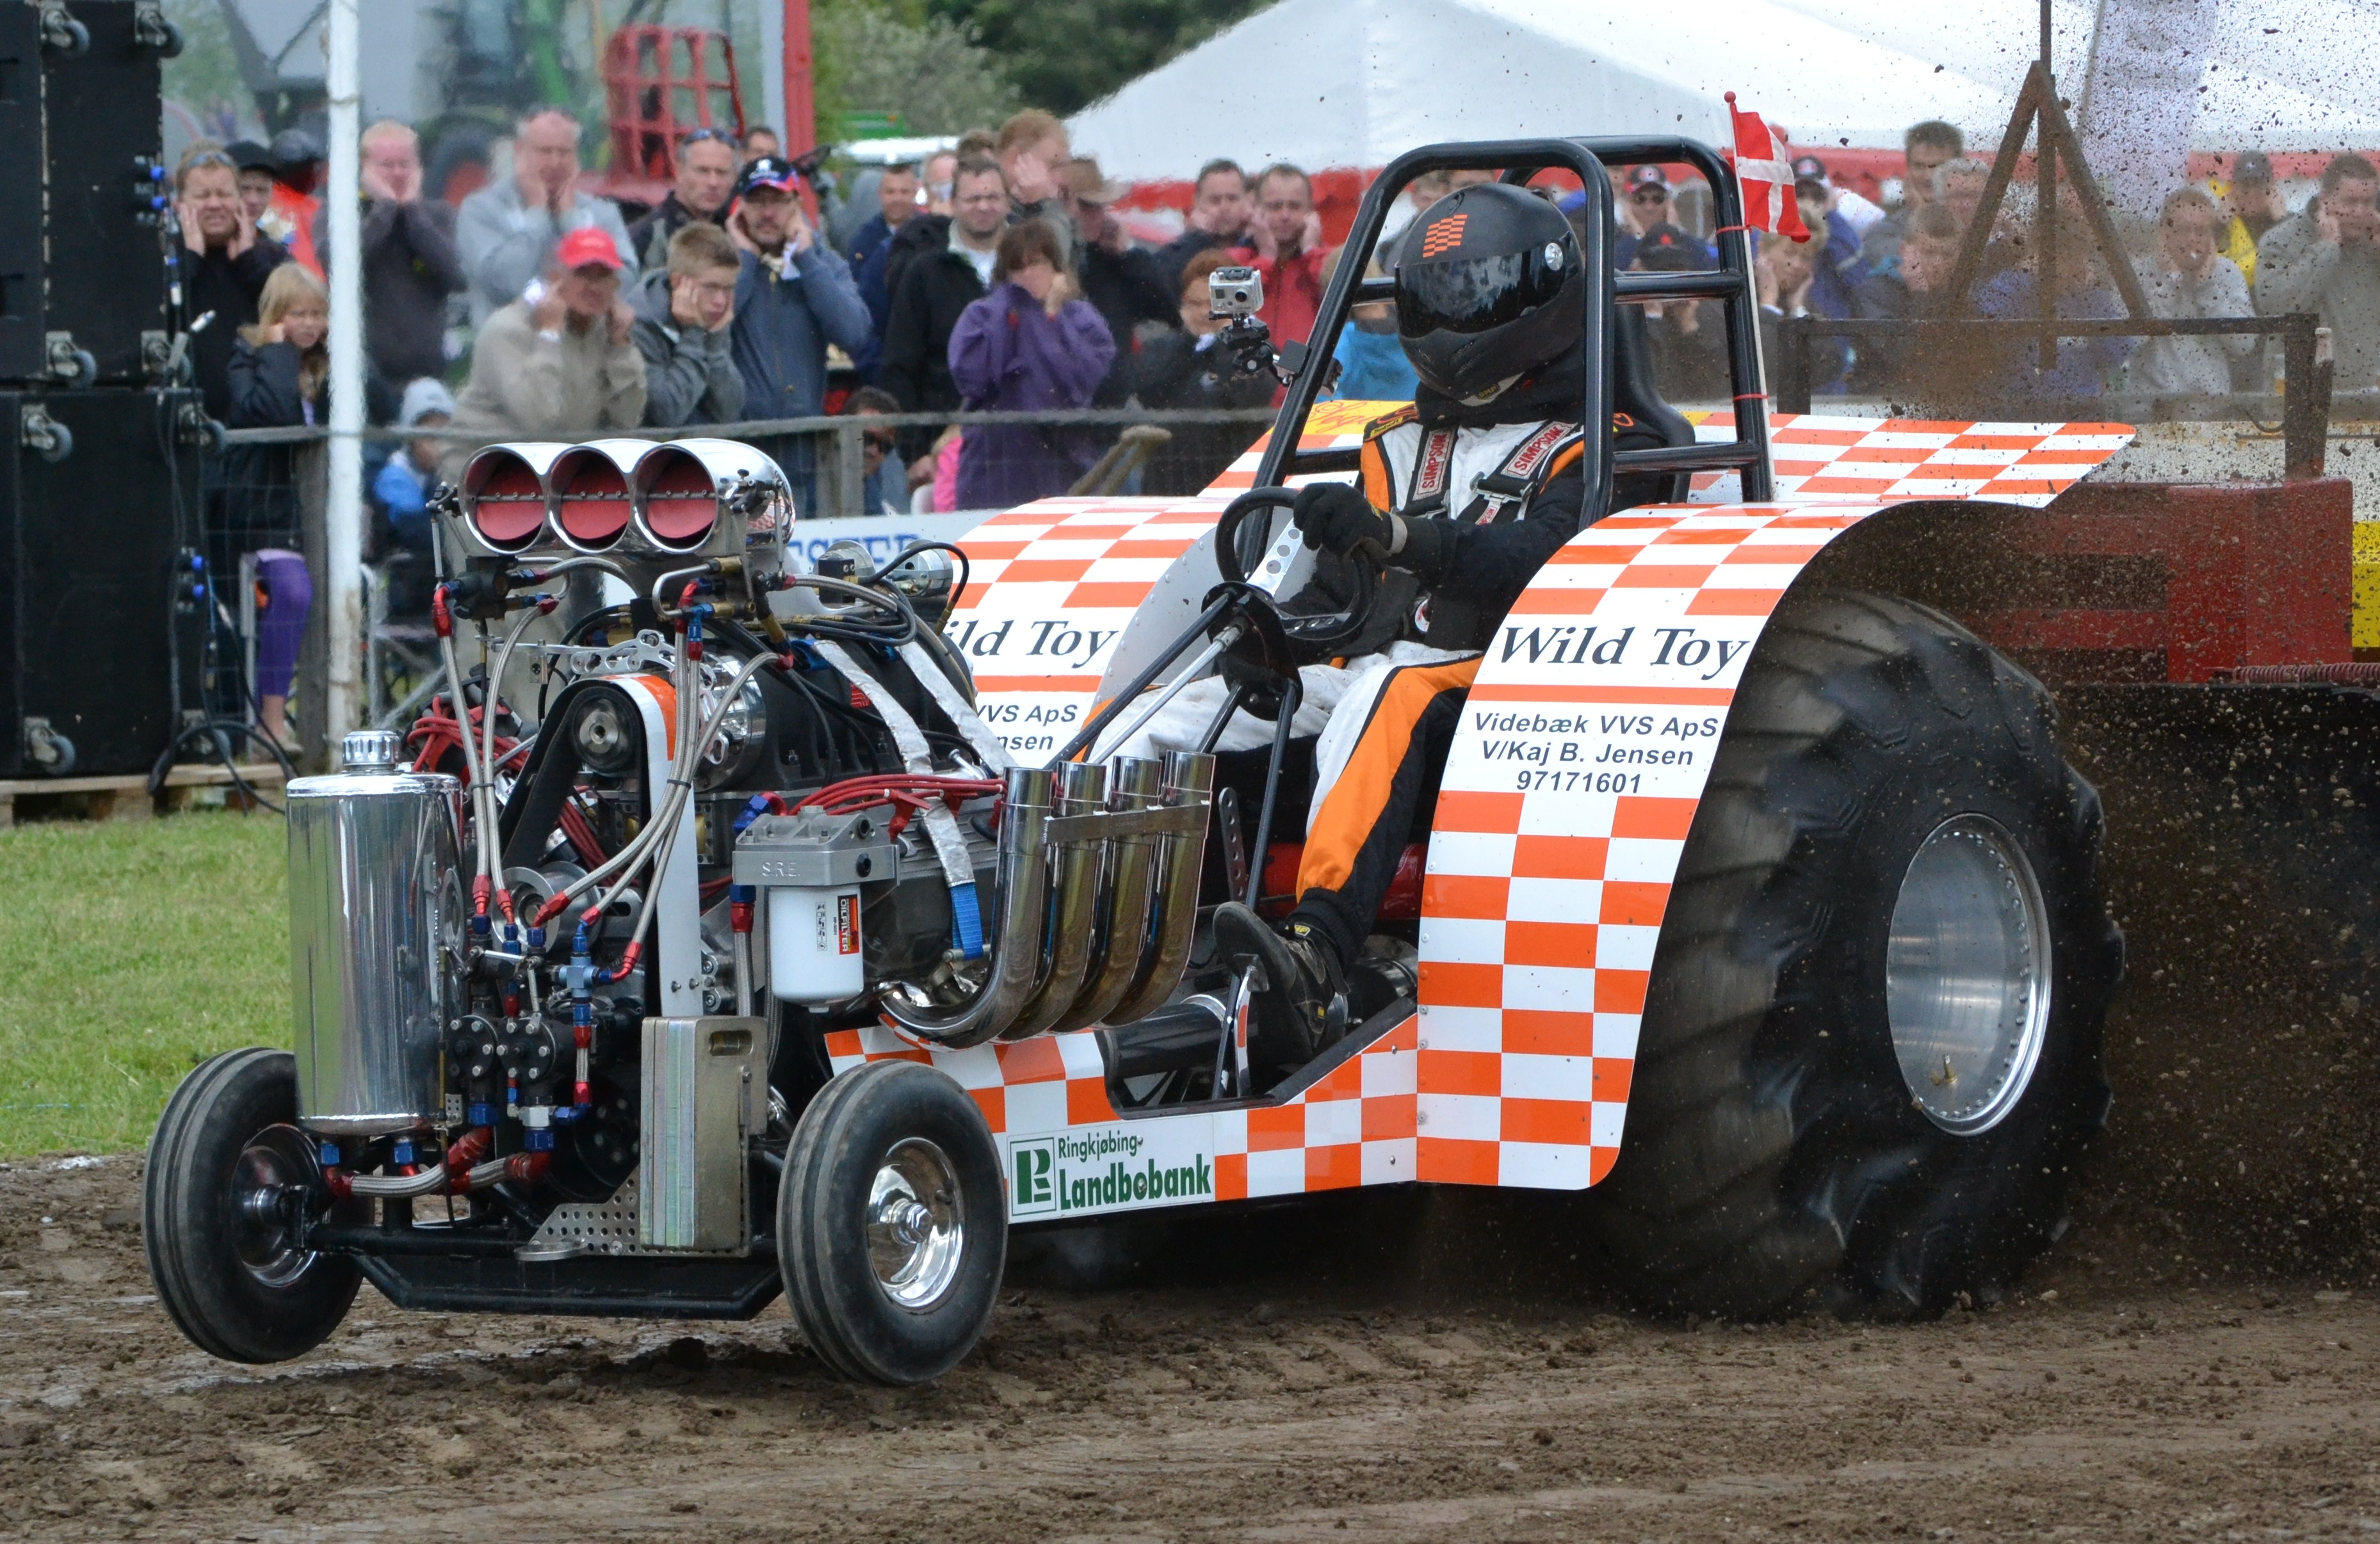 tractor pulling, Race, Racing, Hot, Rod, Rods, Tractor, Engine, R, Jpg Wallpaper